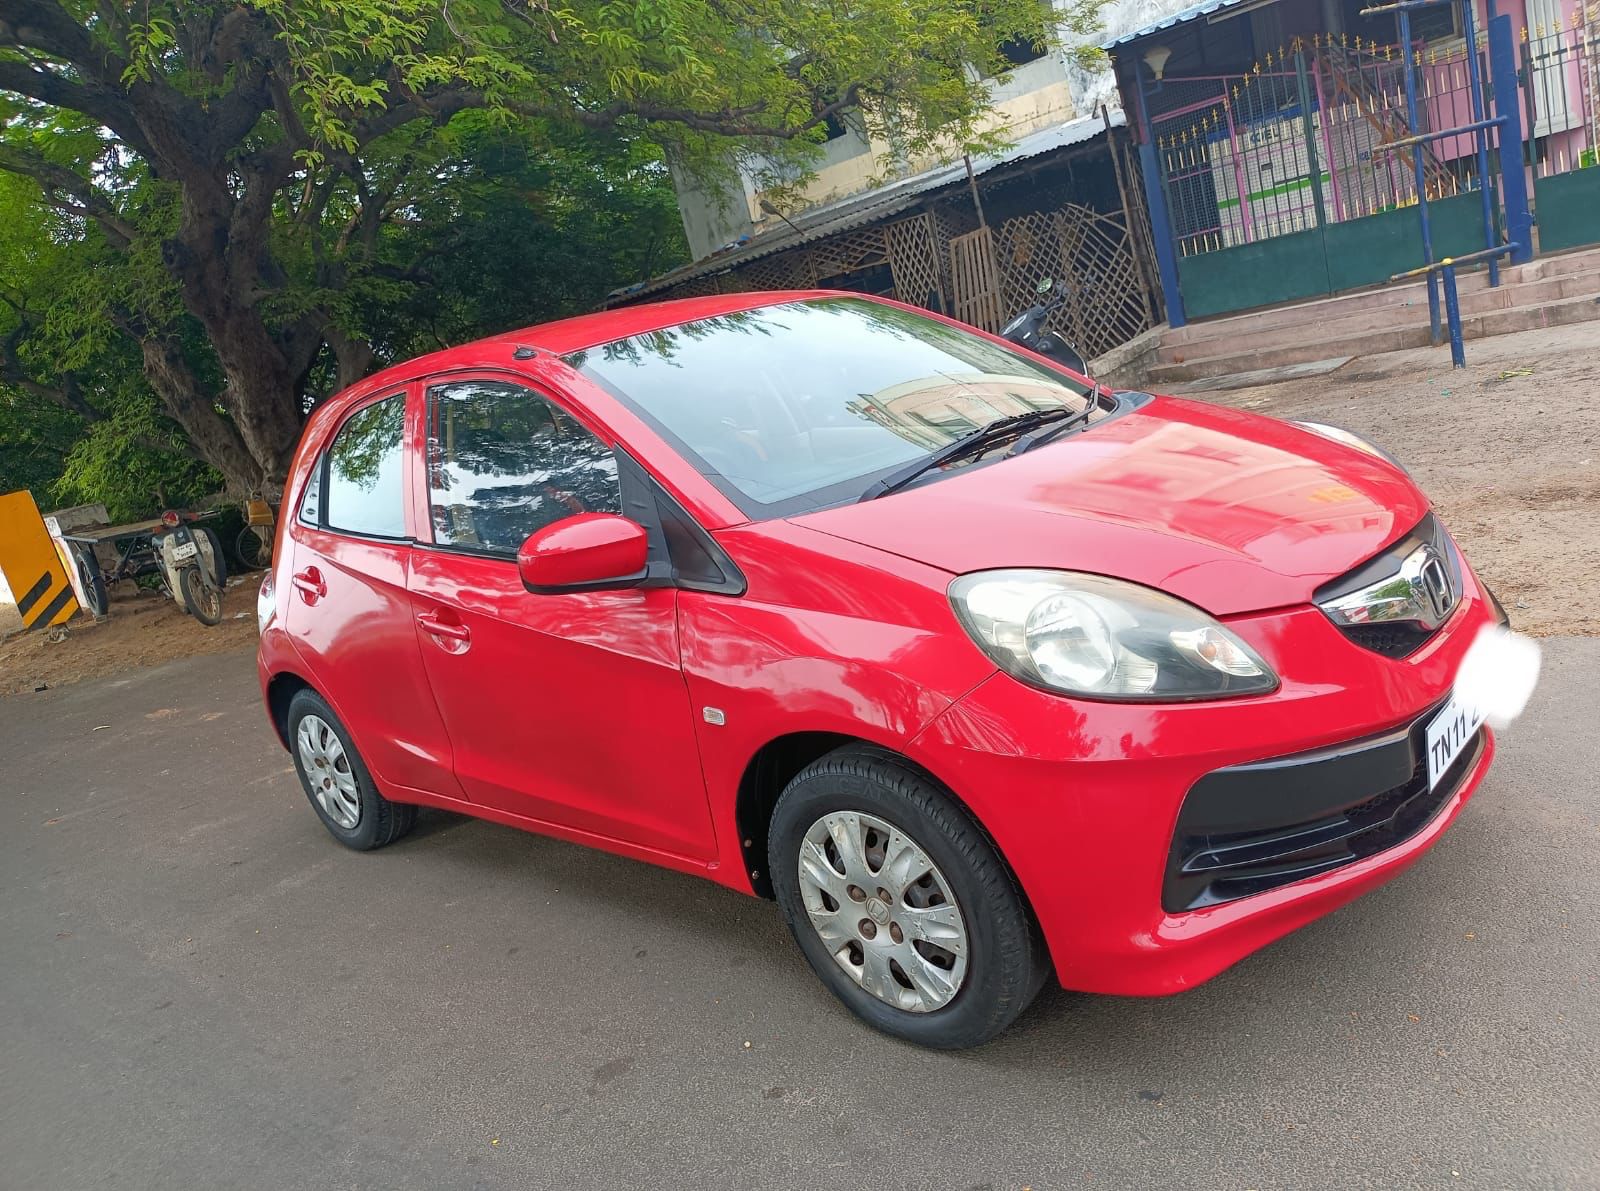 3679-for-sale-Honda-Brio-Petrol-First-Owner-2012-TN-registered-rs-299000